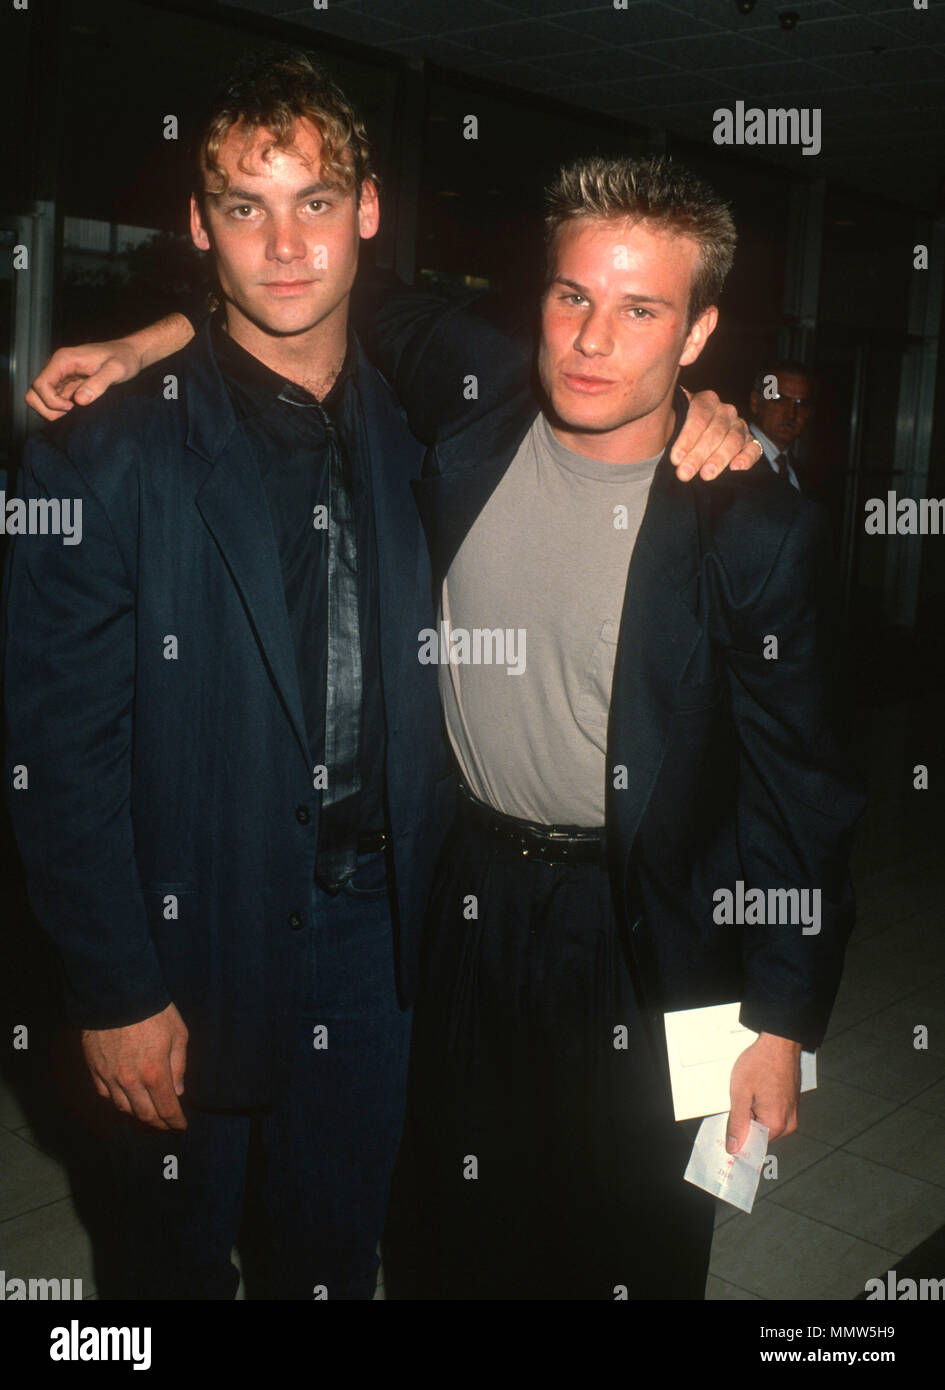 CENTURY CITY, CA - JUNE 14:  (L-R) Actors Eric DaRe and James Marshall attend ABC TV Affiliates Party at the Century Plaza Hotel on June 14, 1990 in Century City, California. Photo by Barry King/Alamy Stock Photon Stock Photo